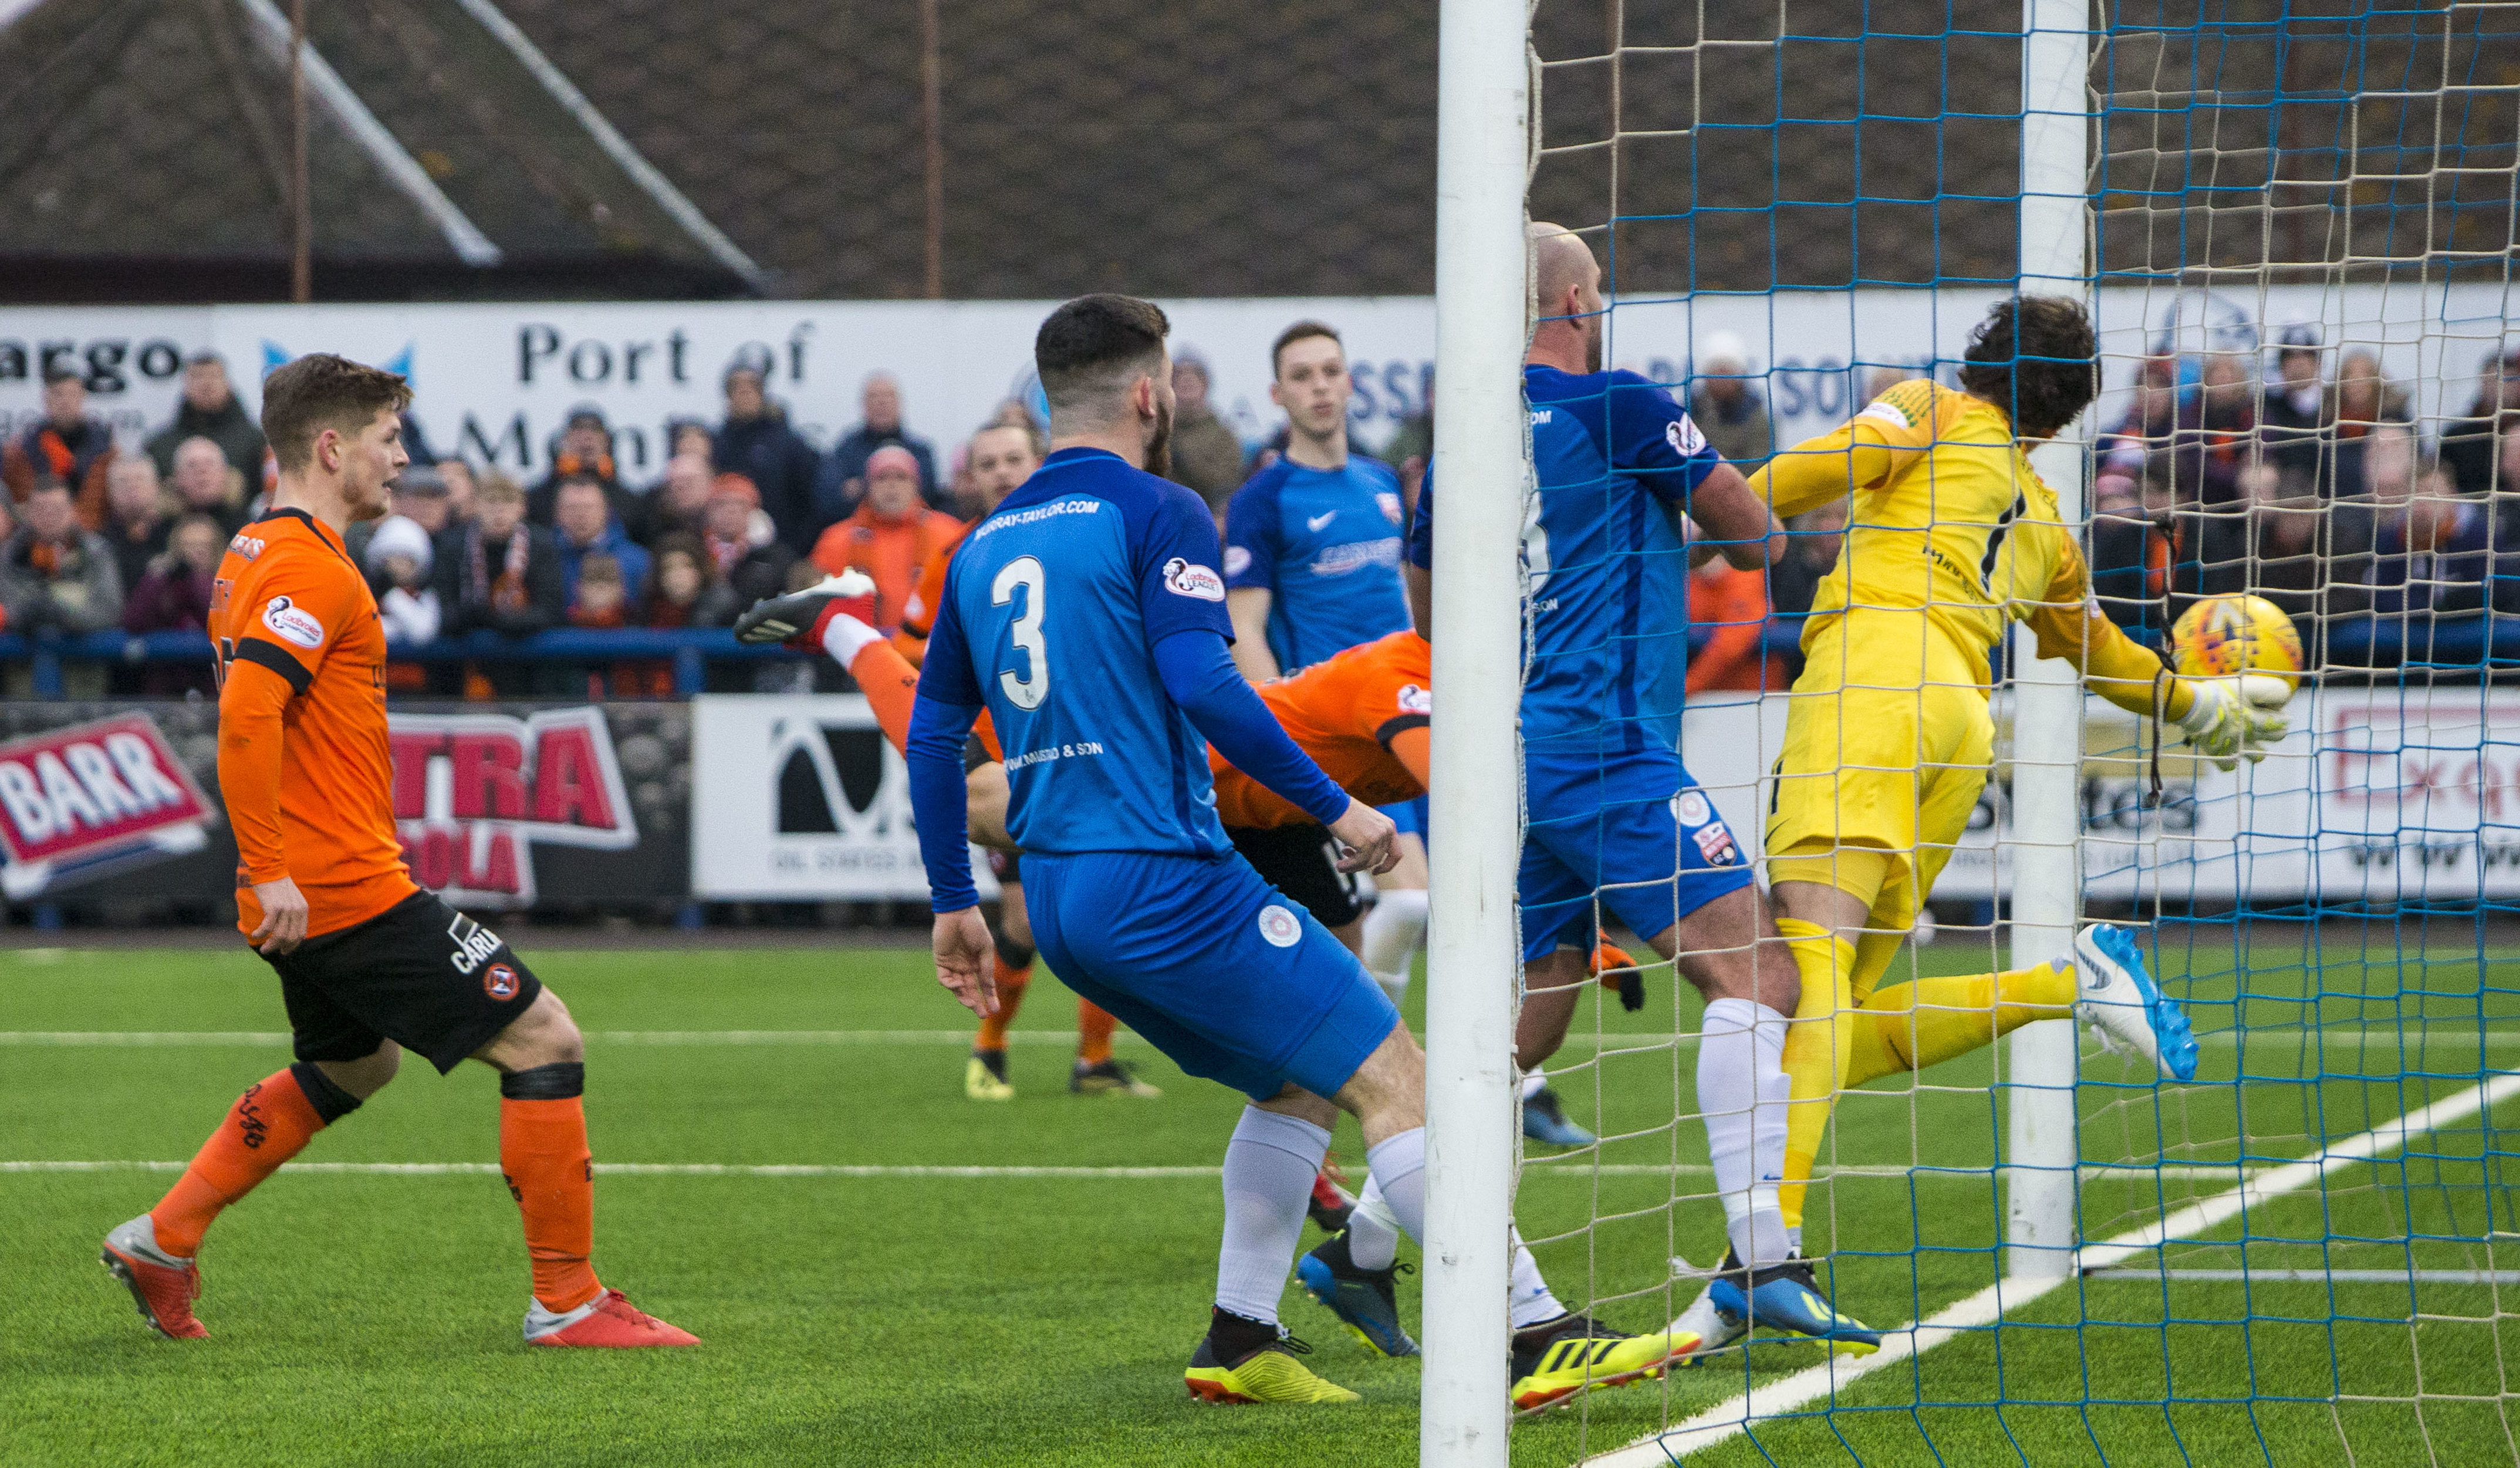 Dundee United's Pavol Safranko heads in from close range to open the scoring